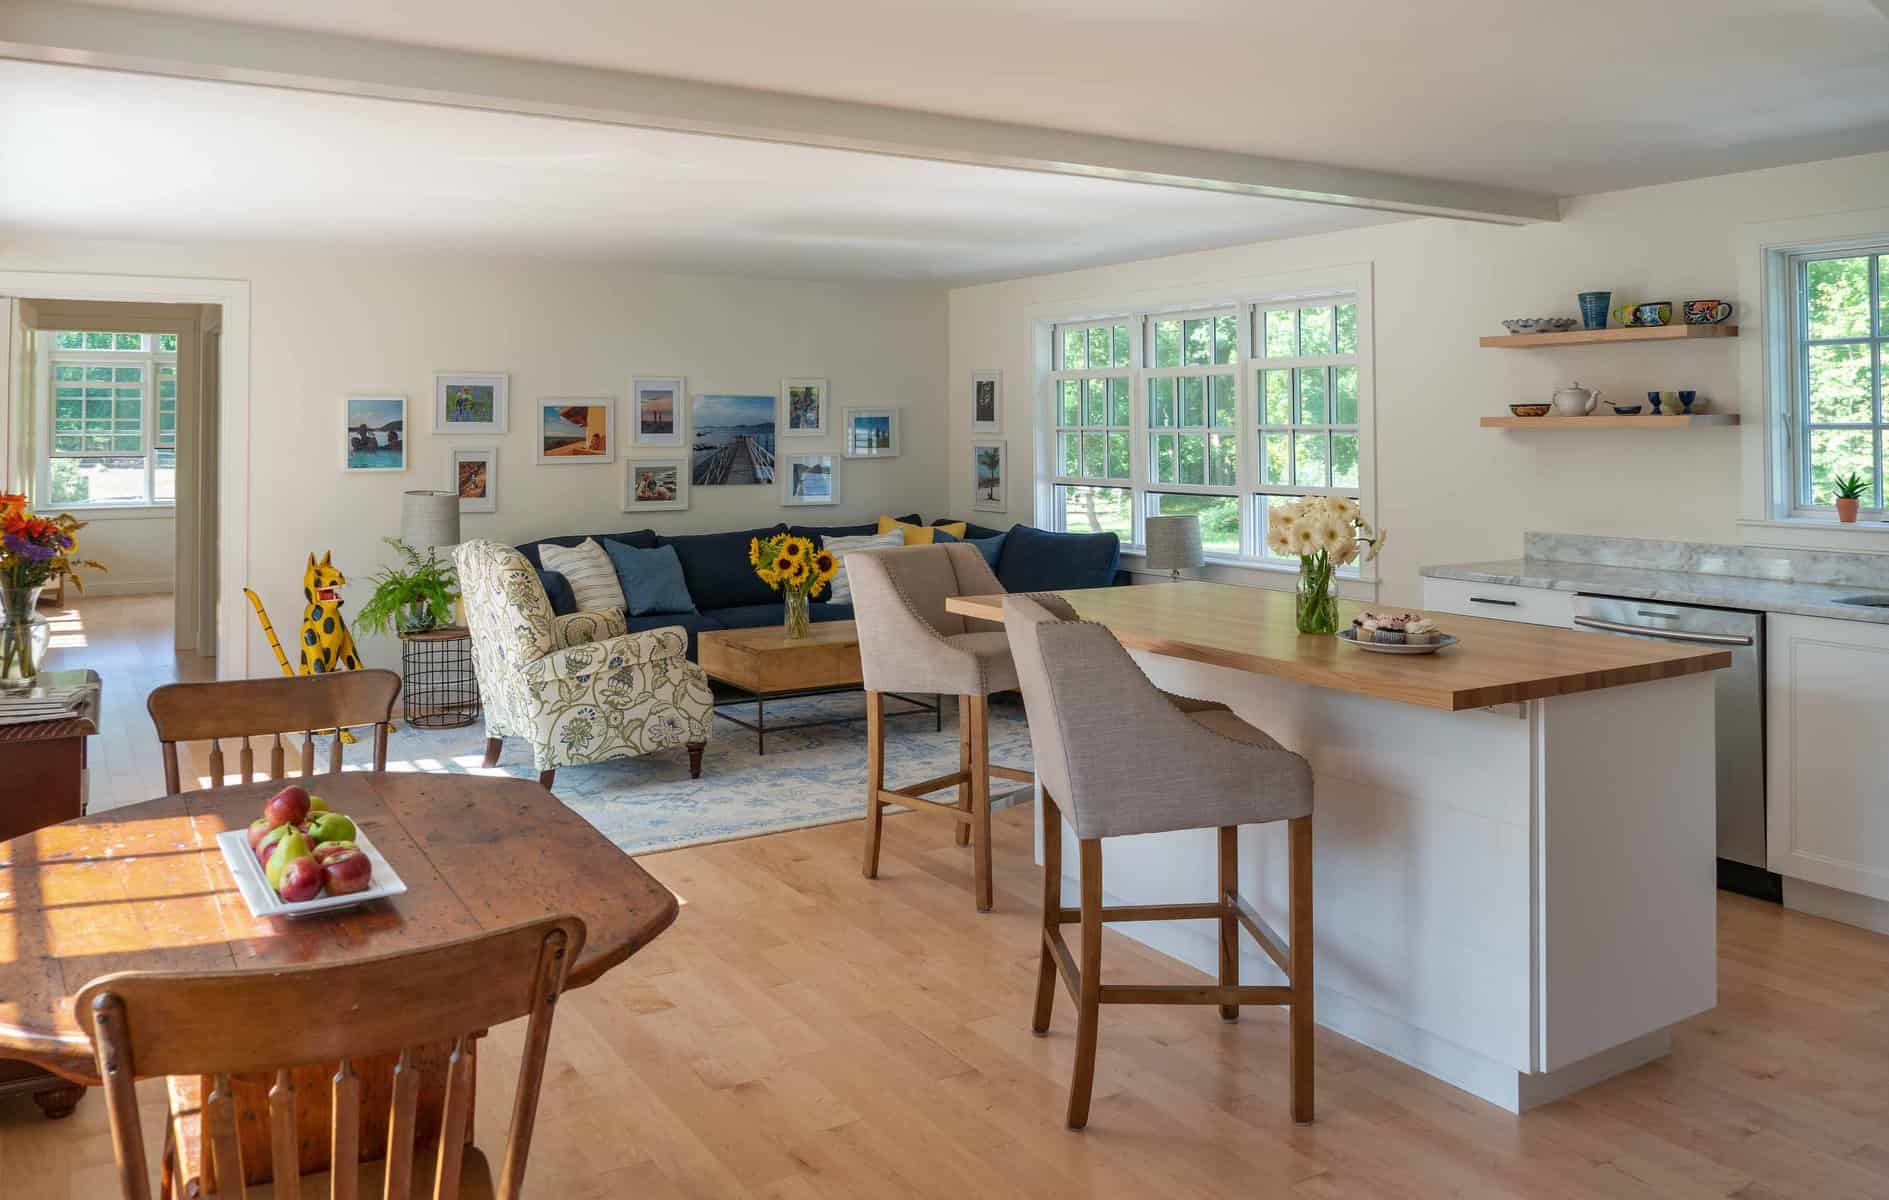 A light-filled combined kitchen, breakfast, and living area is the main space of the new in-law apartment; the bedroom and bathroom are spaces just beyond.